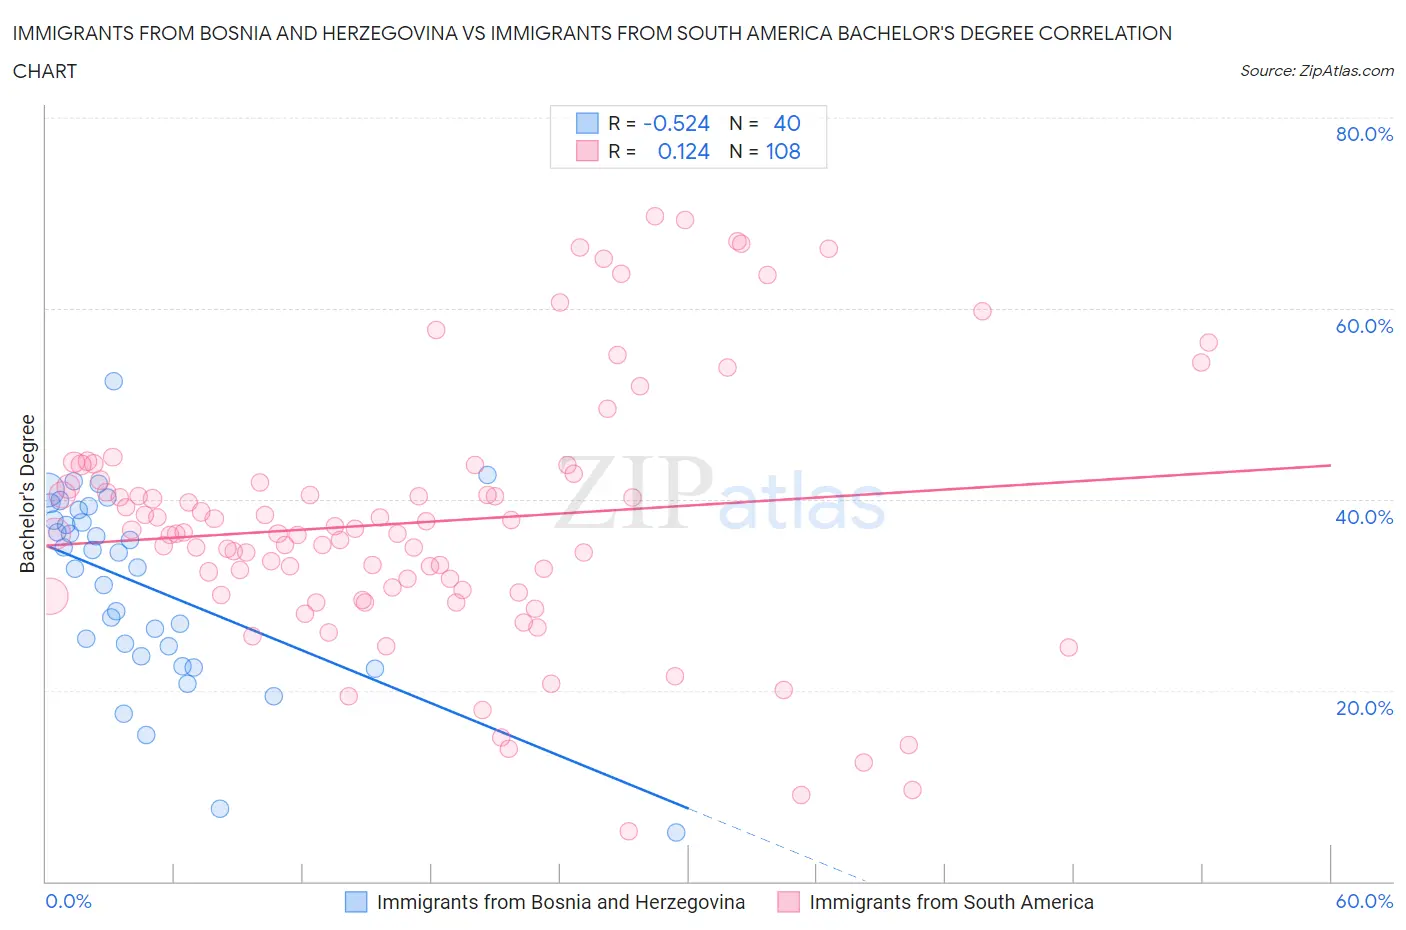 Immigrants from Bosnia and Herzegovina vs Immigrants from South America Bachelor's Degree